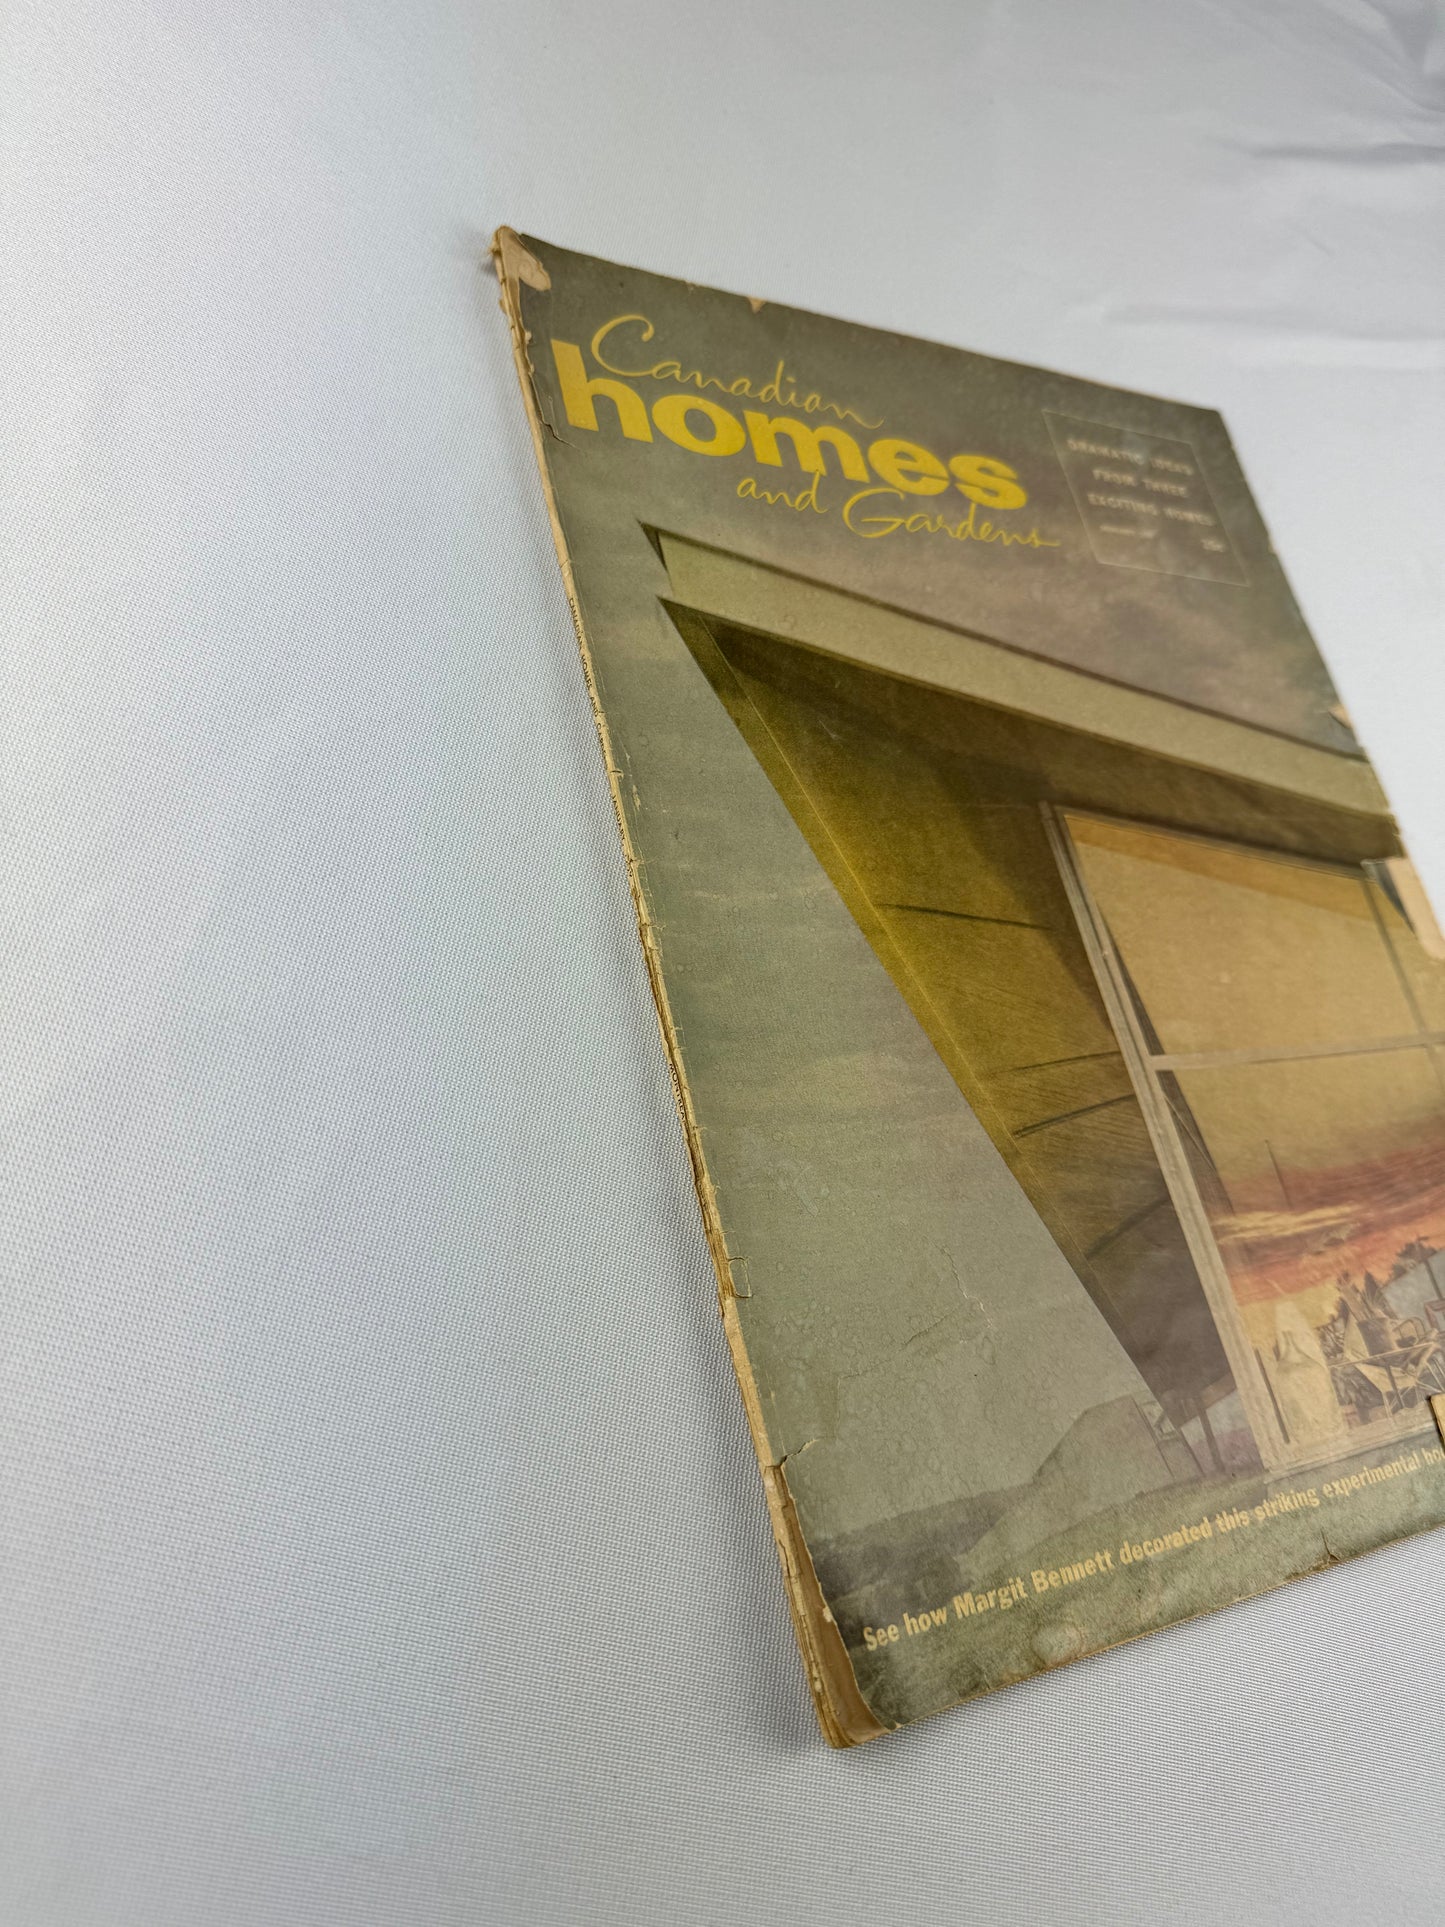 1959 Canadian Homes and Gardens Magazine January Issue